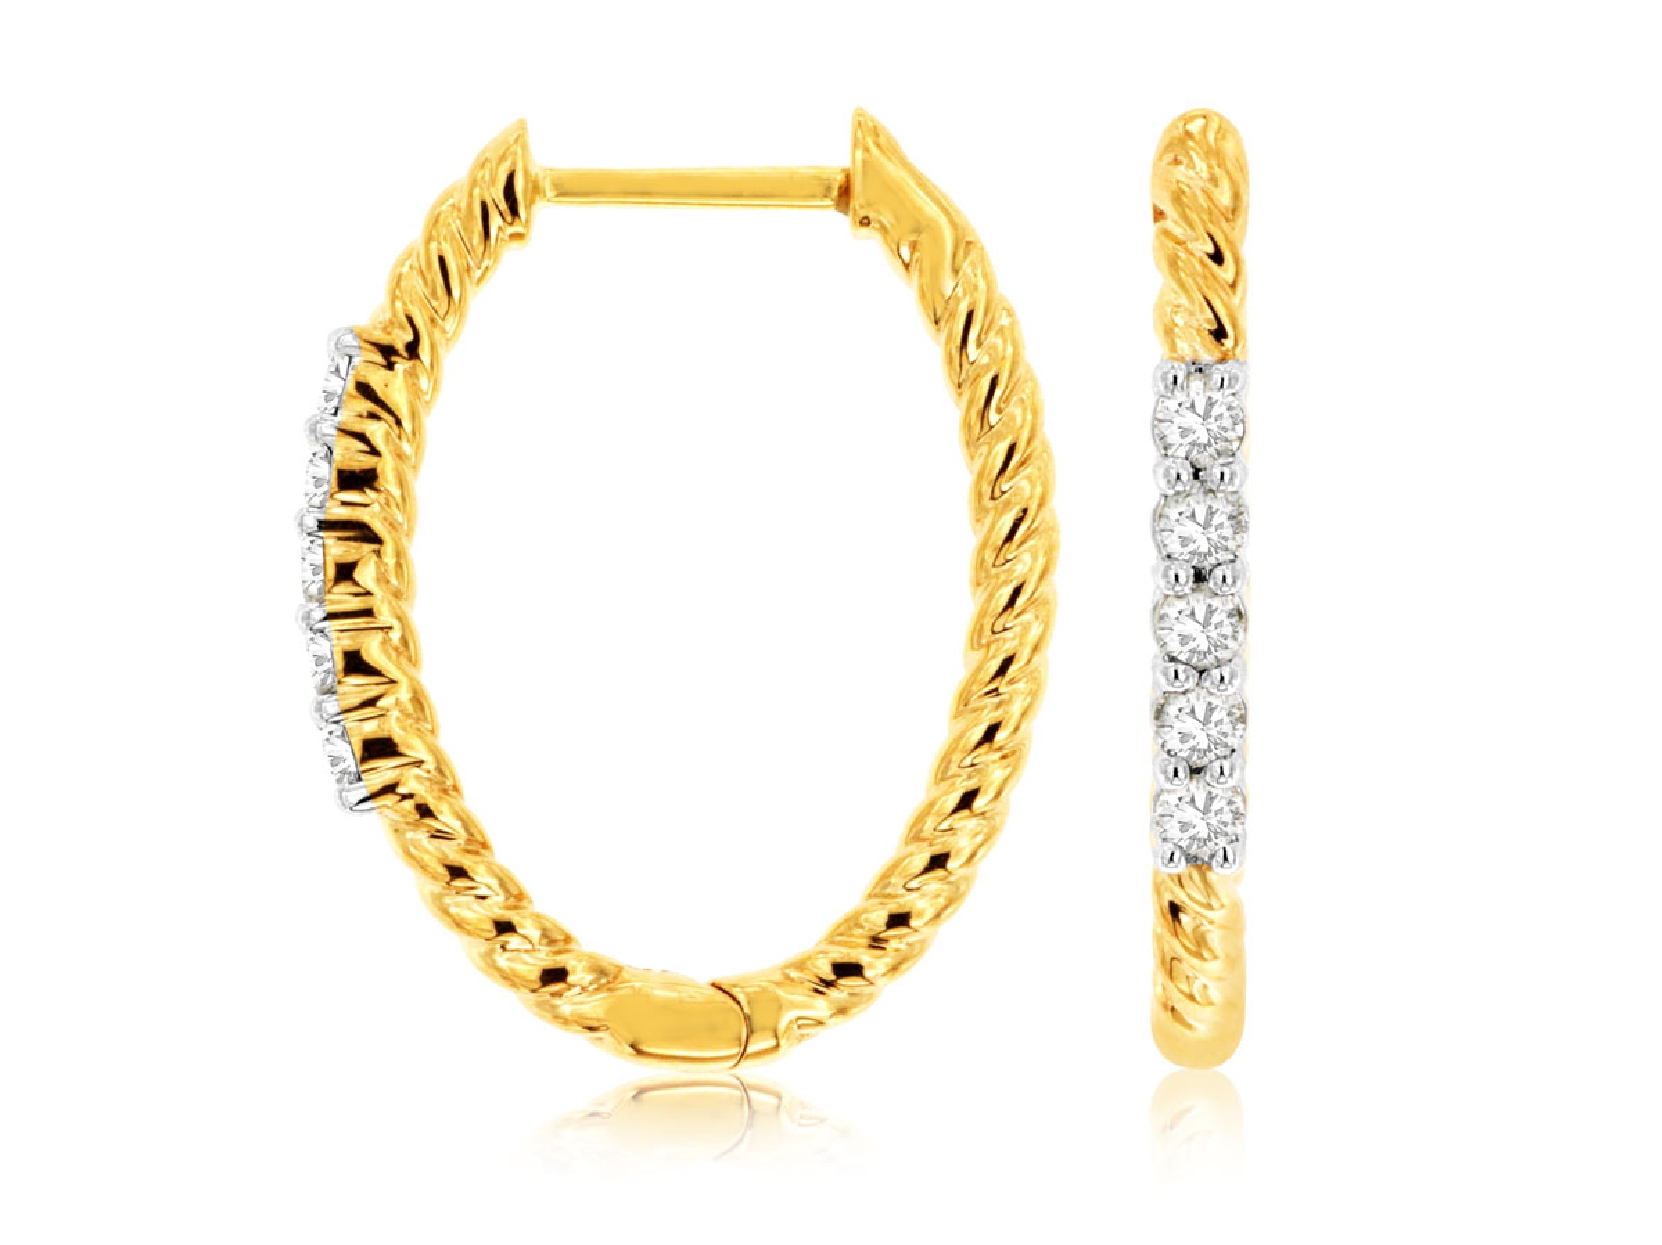 14K Ribbed Yellow Gold Hoops with Diamond Accents

0.20cttw Diamonds